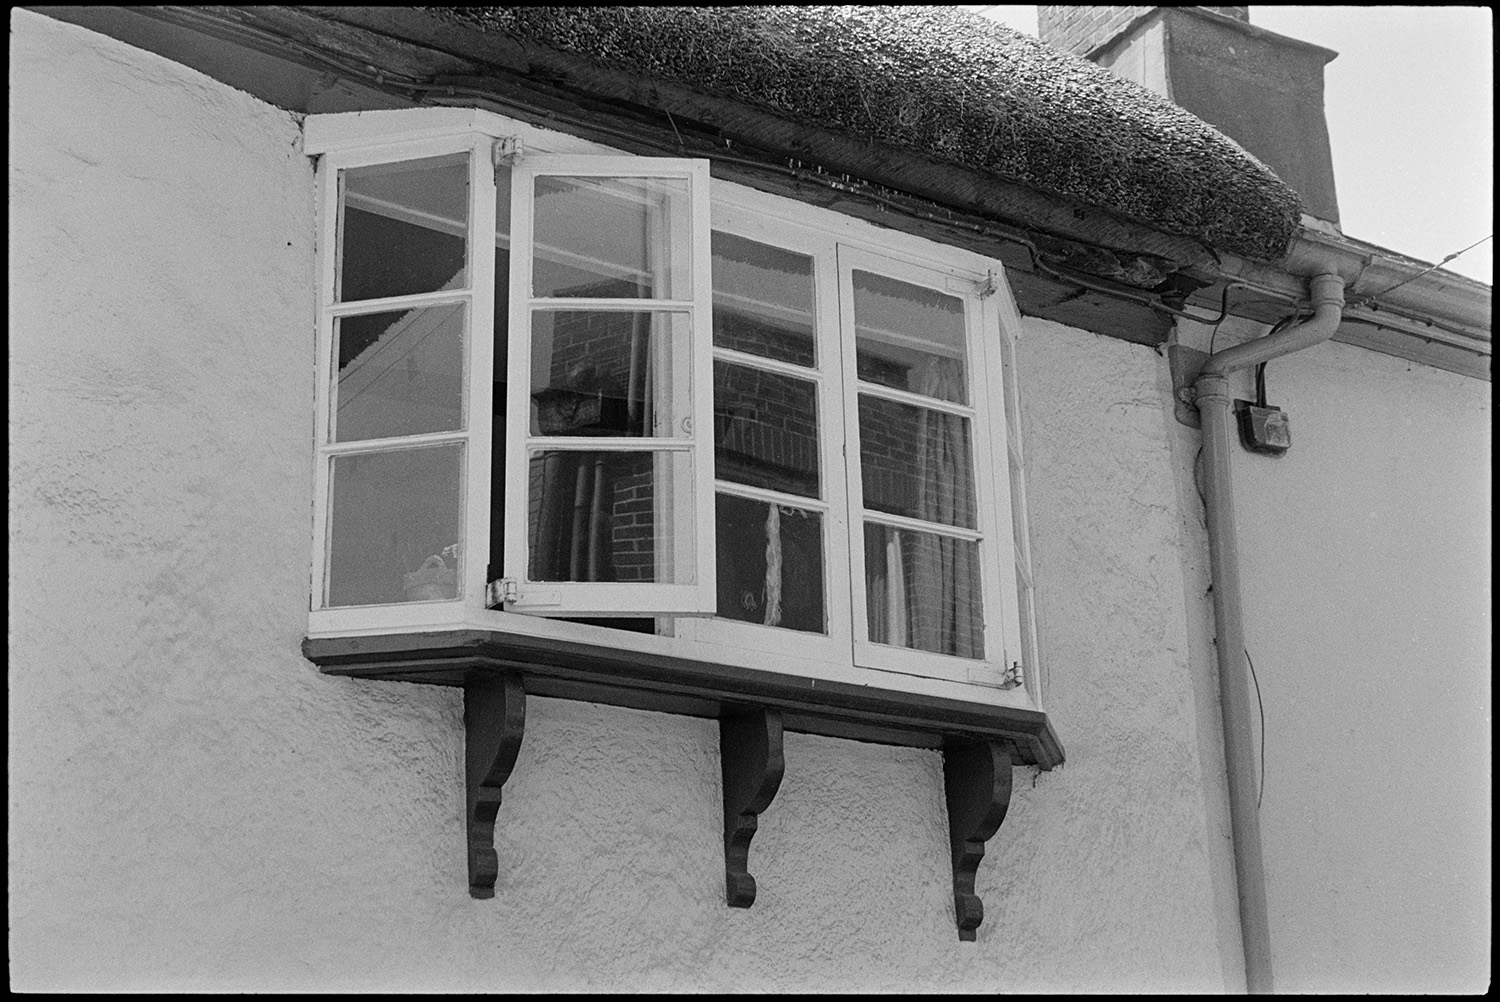 Details of windows of old house, oriel window.
[An oriel window on an old house with a thatched roof in South Molton Street, Chulmleigh.]